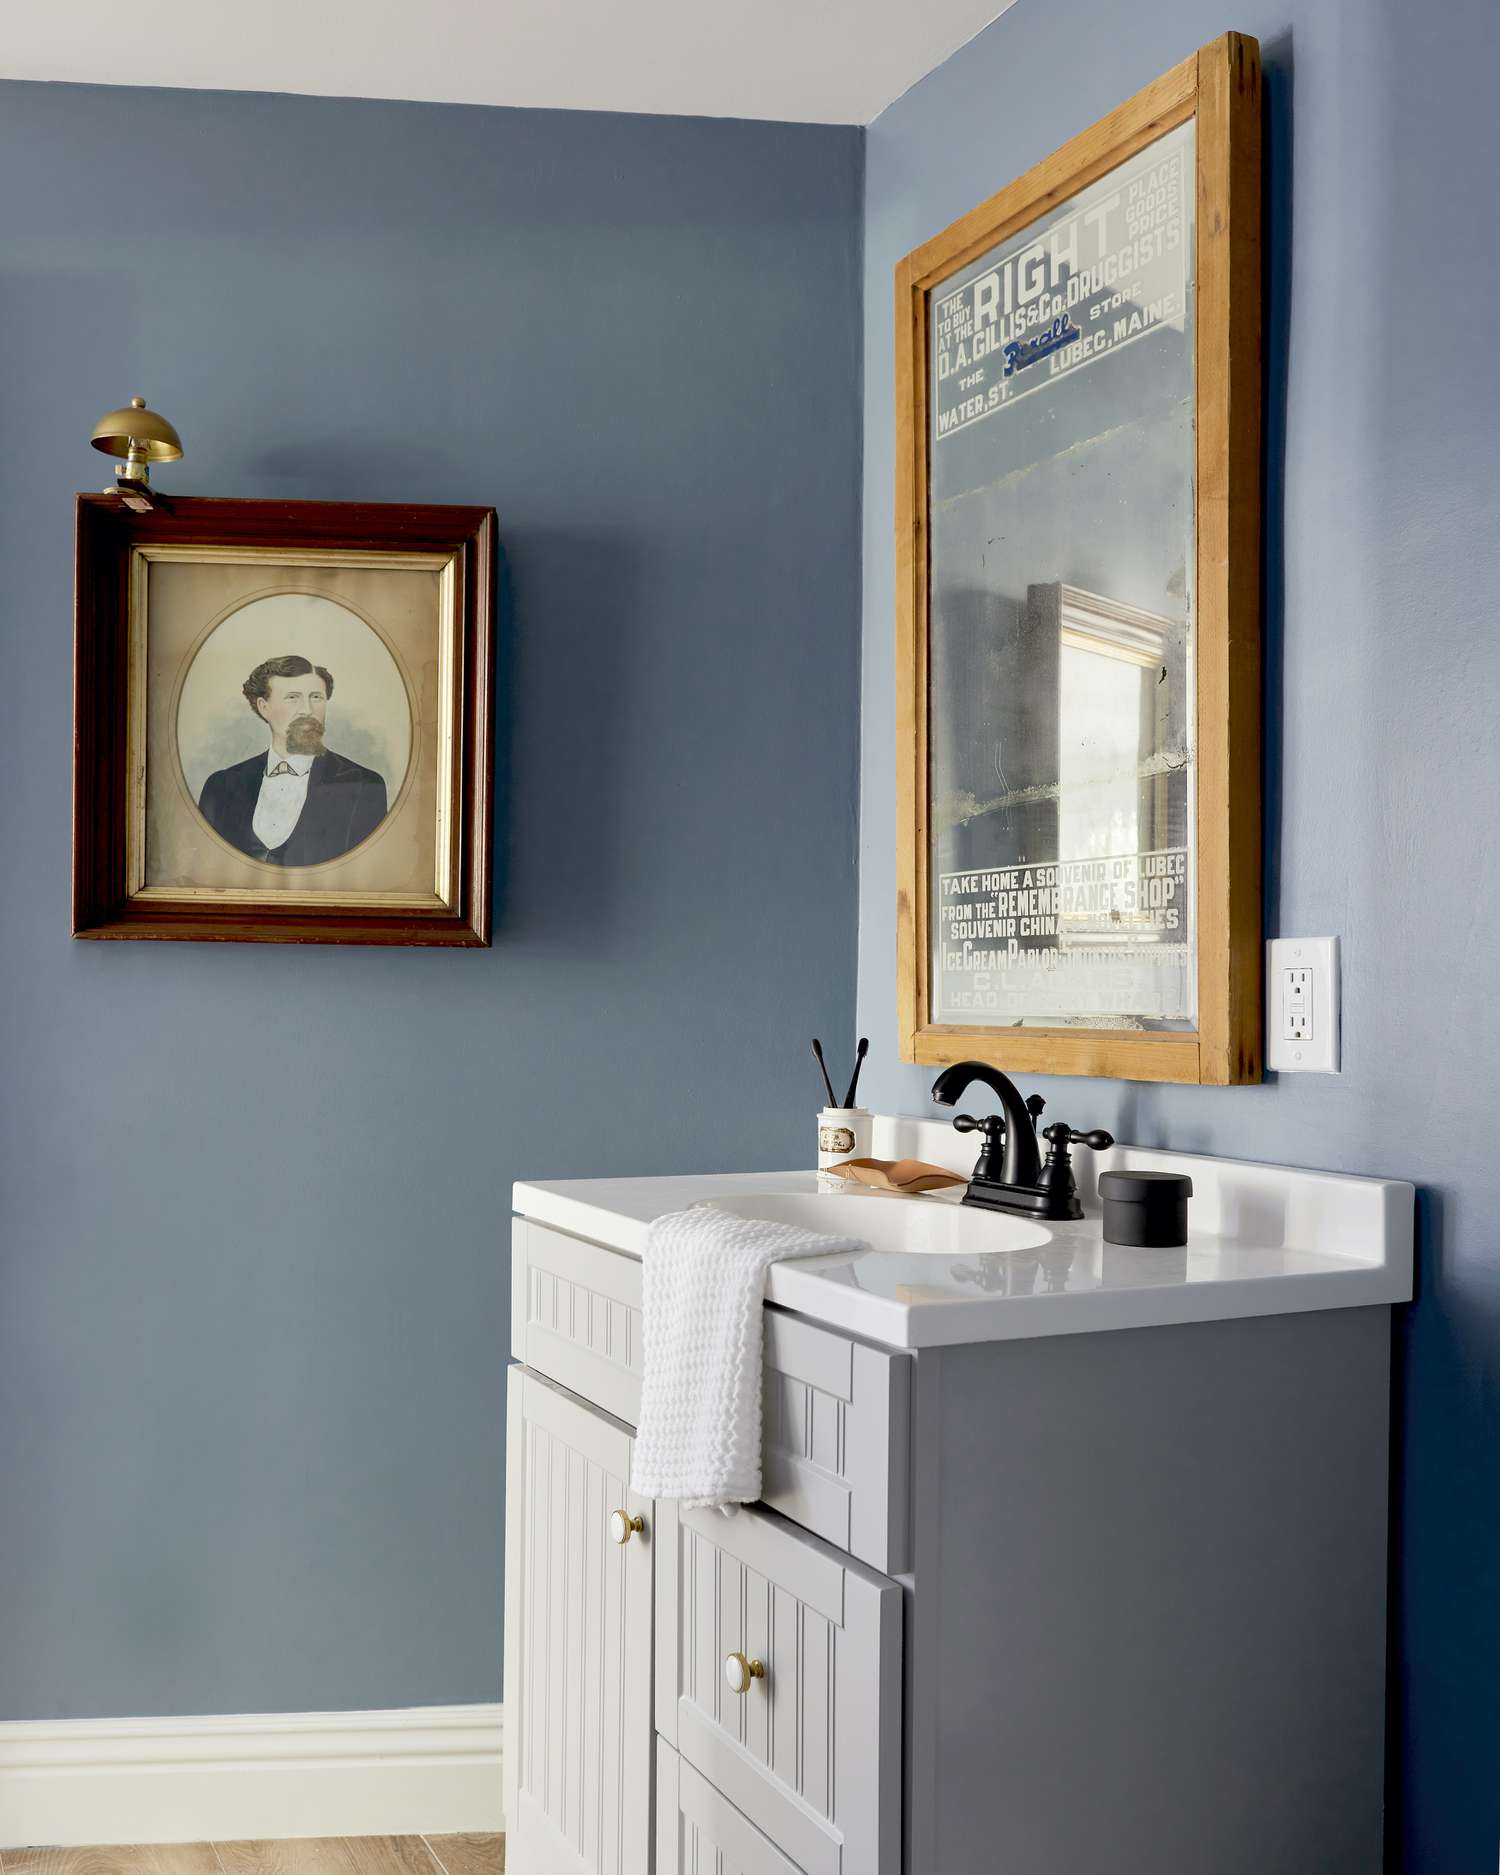 Blue bathroom mirror and sink with wall art